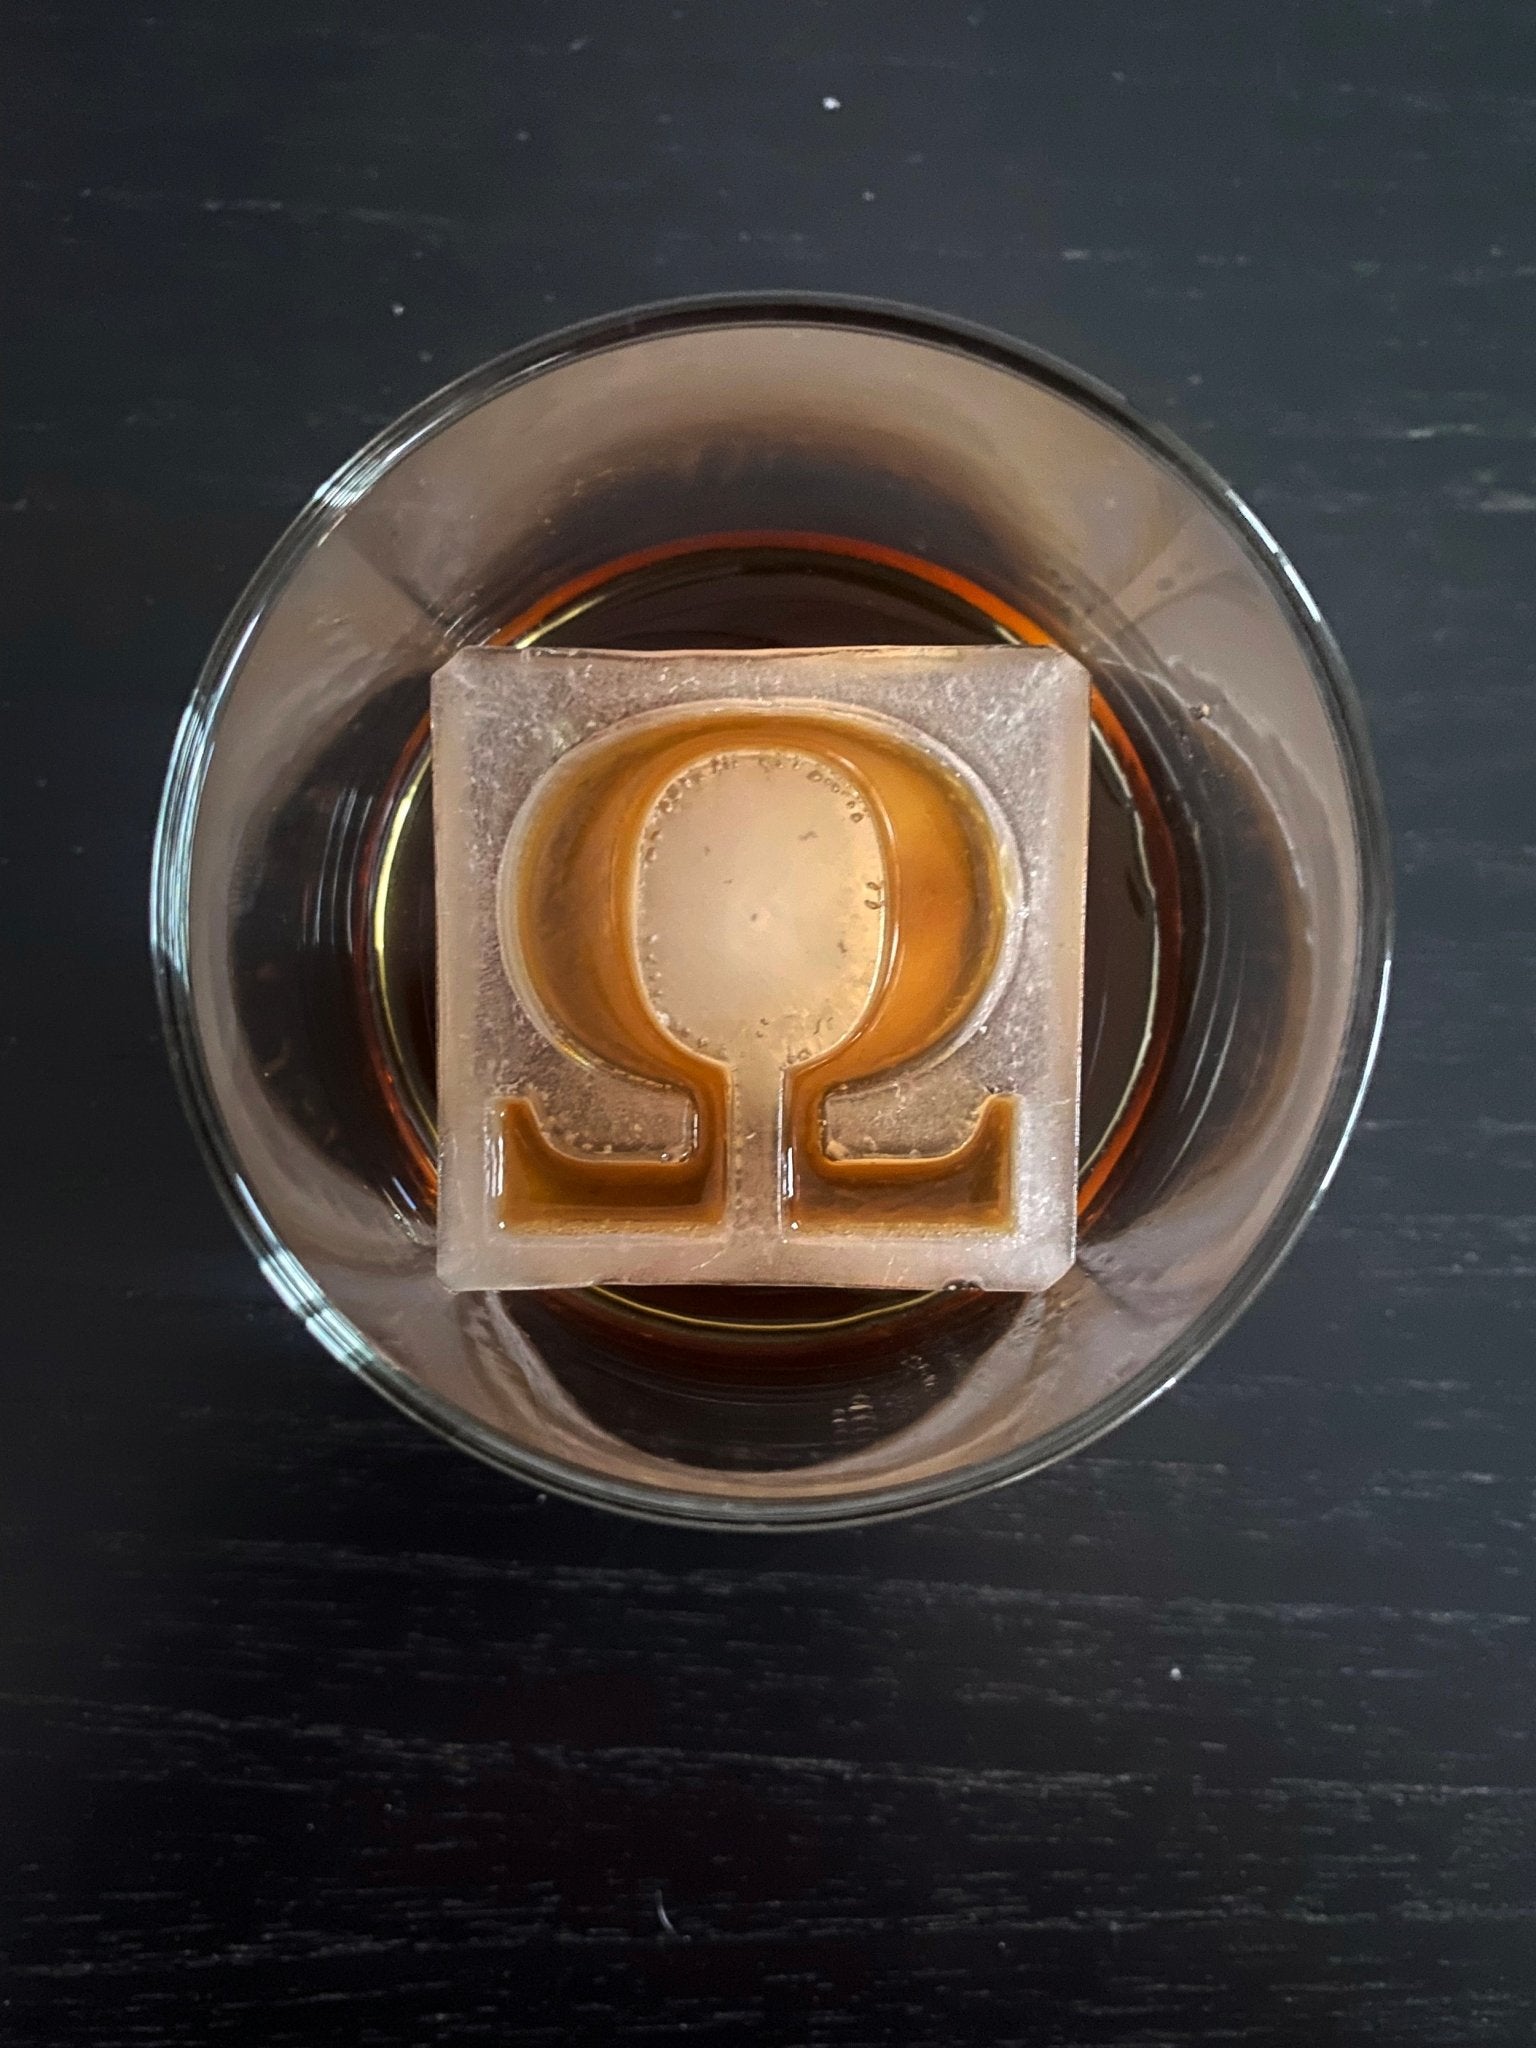 Inverted Personalized 2.1 Inch Ice Cube Mold 